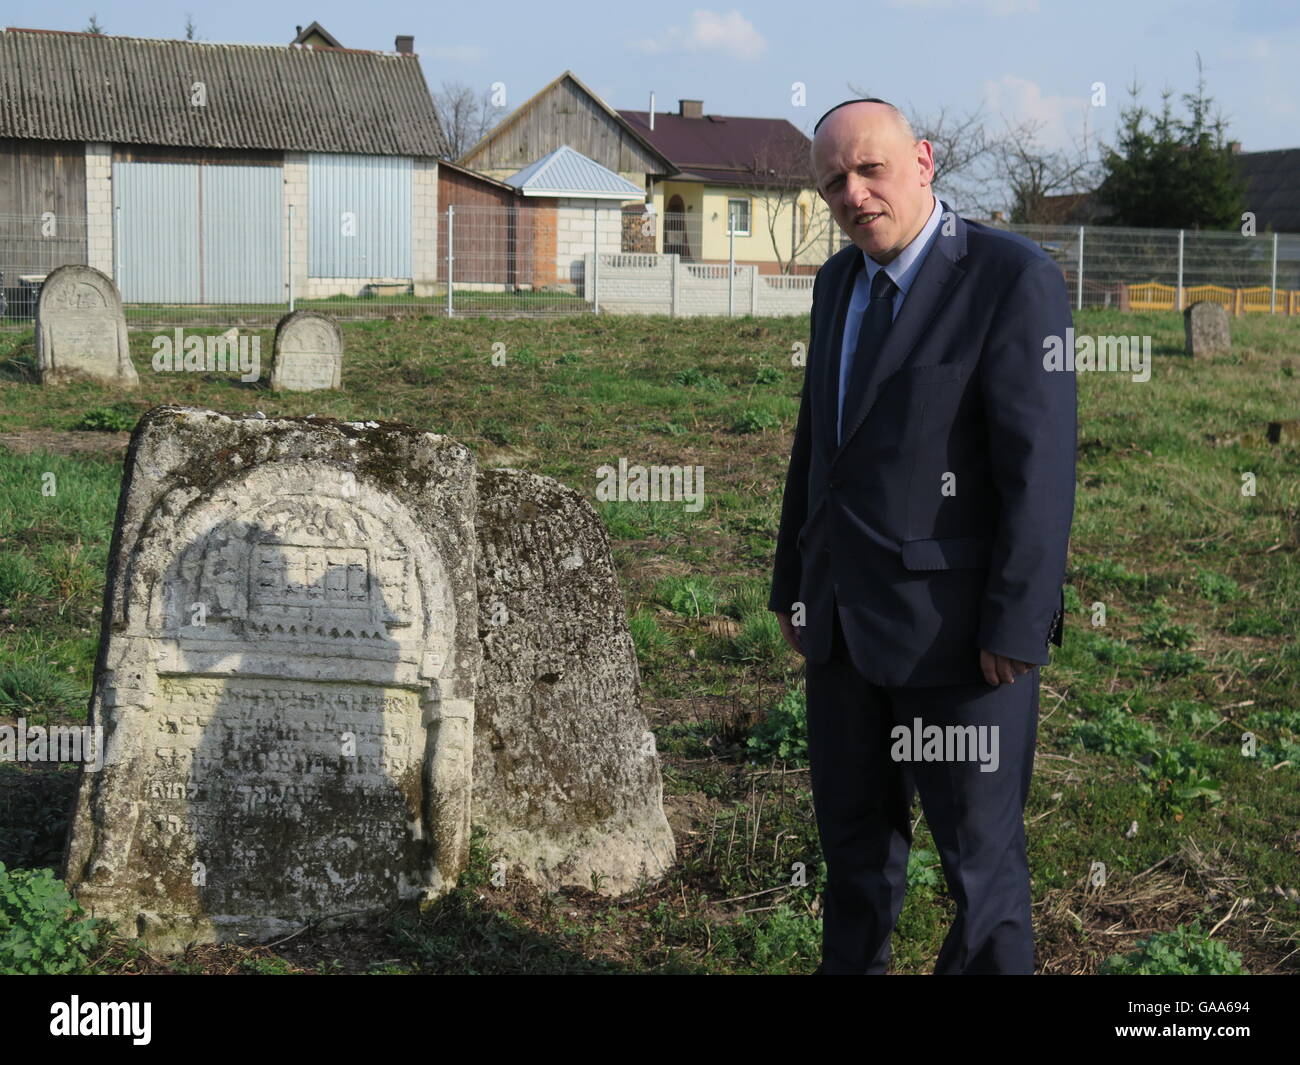 Frampol, Poland. 6th Apr, 2016. Phil Carmel of the European Jewish Cemeteries Initiative standing next to one of the few gravestones left on the Jewish cemetery in Frampol, Poland, 6 April 2016. A European initiative and group of volunteers supports the preservation of graves that are not visited anymore. PHOTO: EVA-MARIA-KRAFCZYK/dpa/Alamy Live News Stock Photo